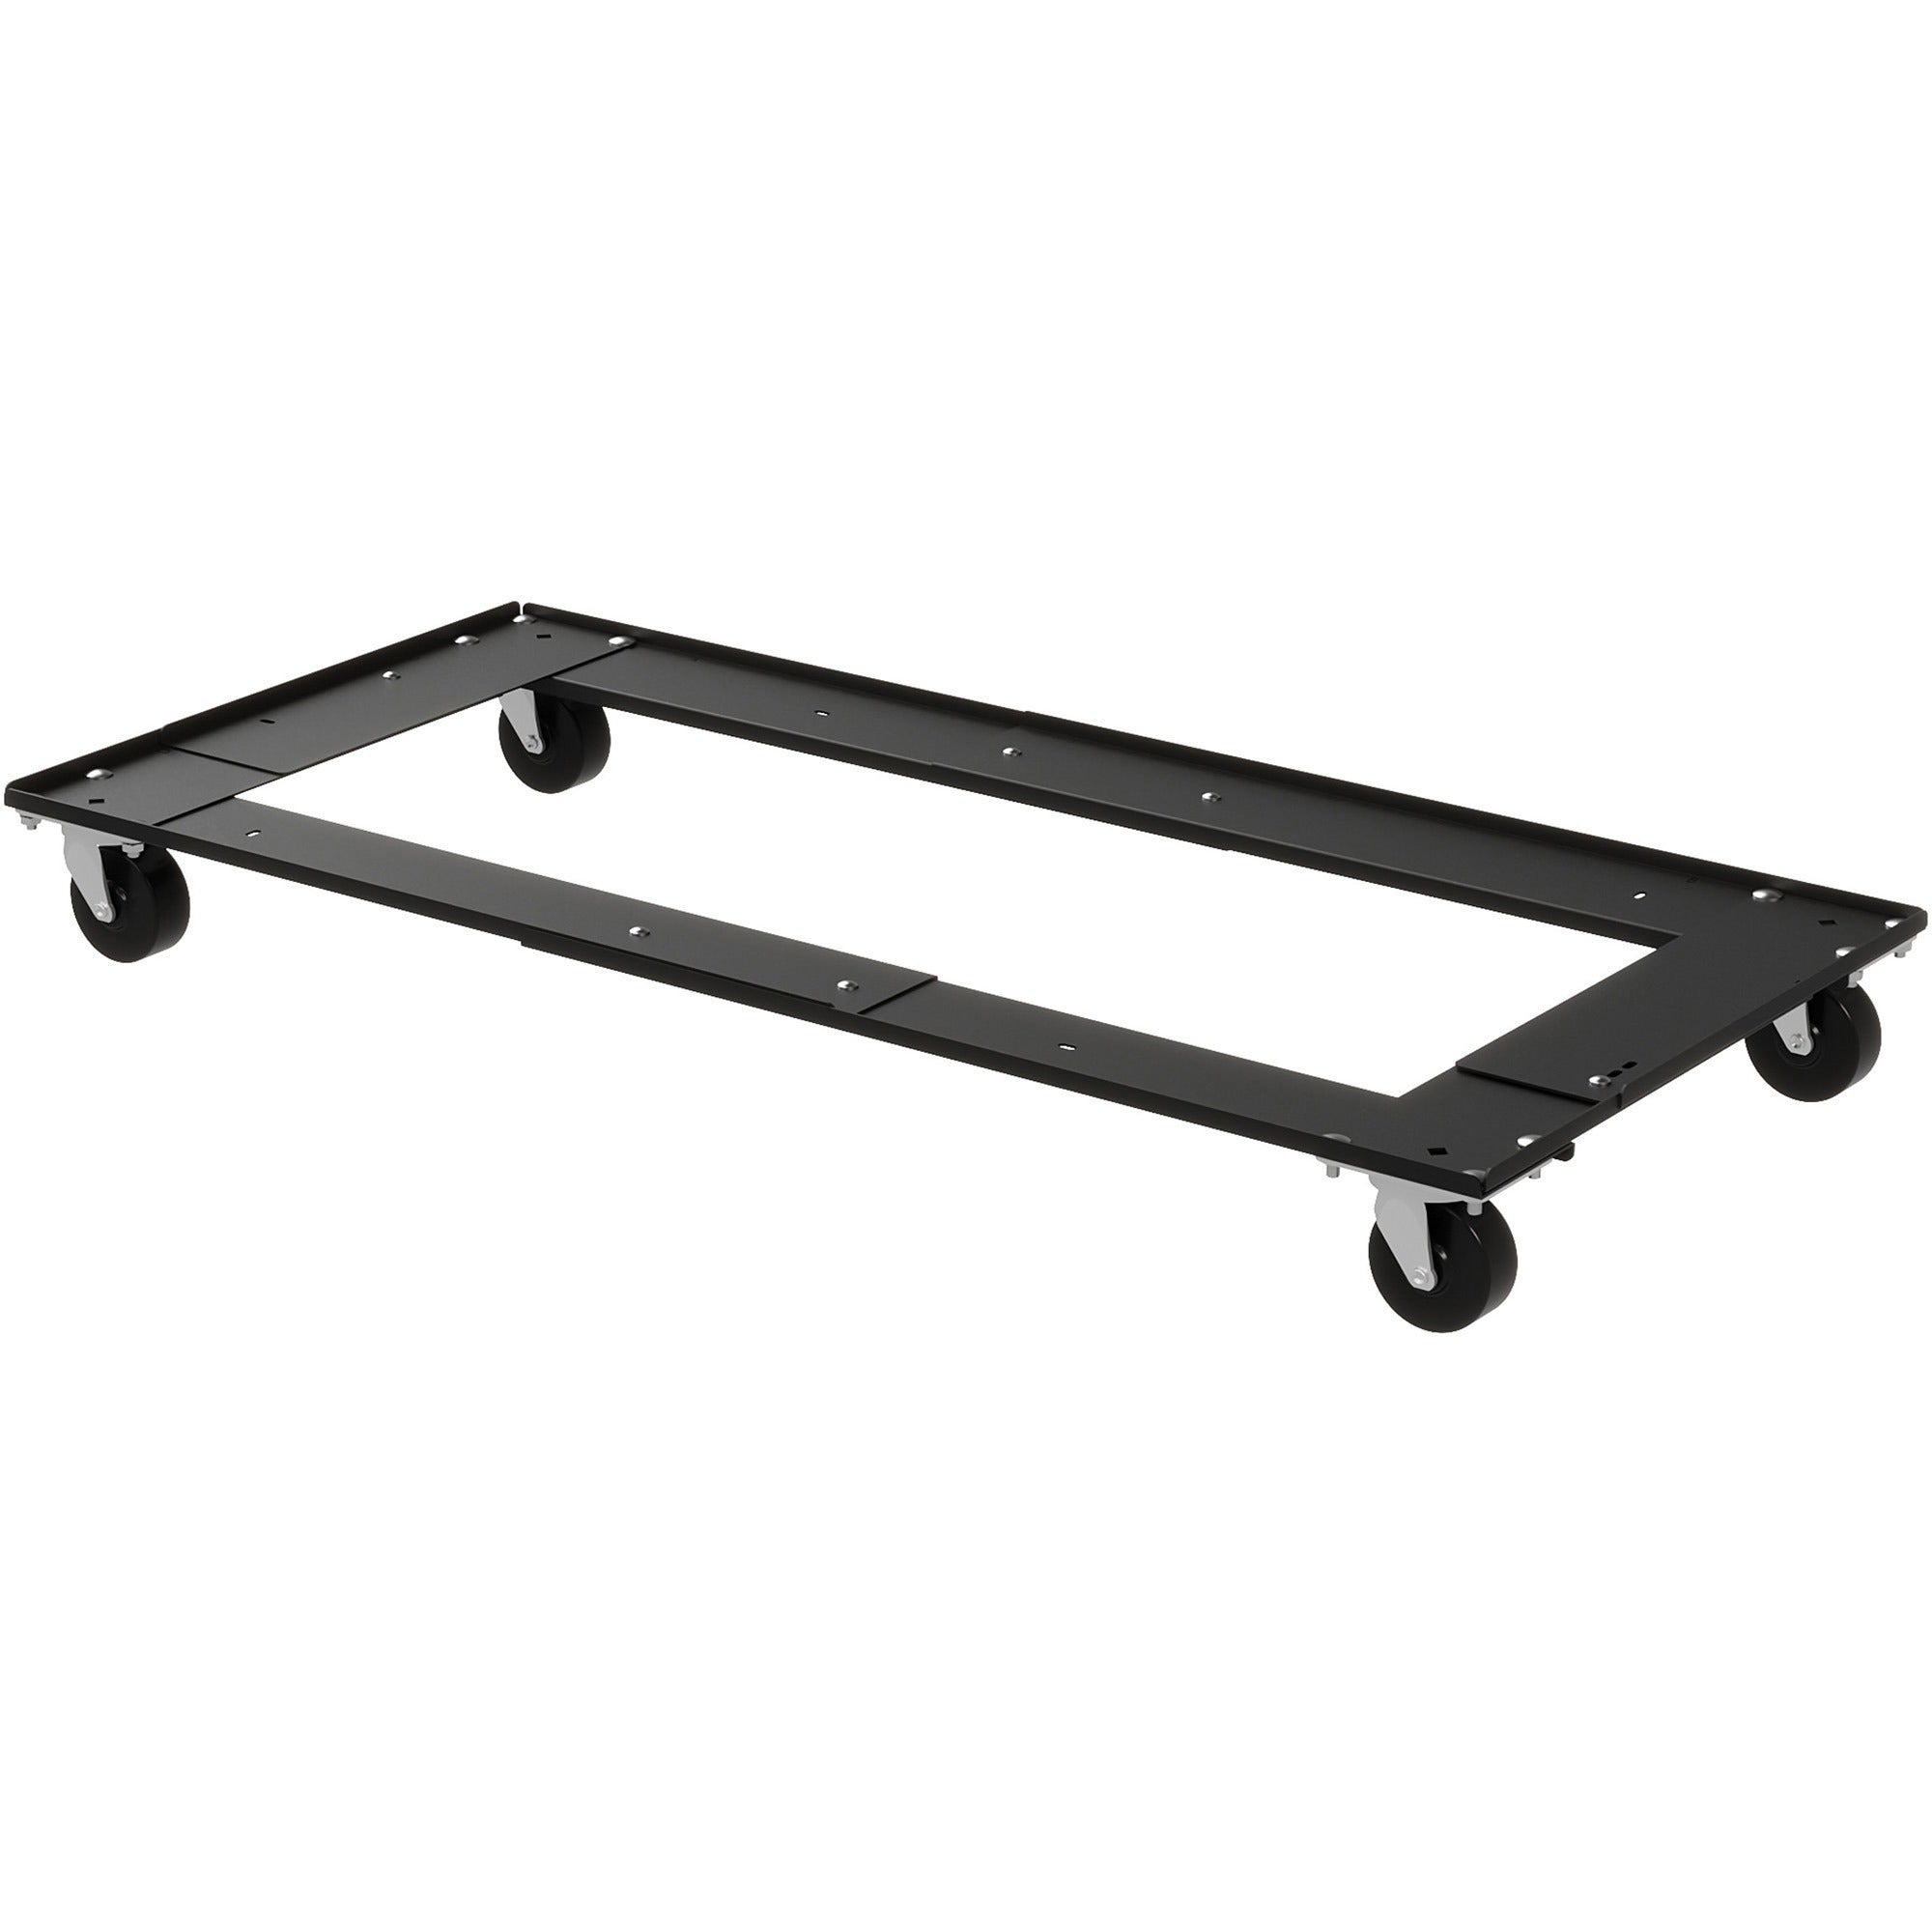 lorell-commercial-cabinet-dolly-metal-x-42-width-x-24-depth-x-4-height-black-1-each_llr59708 - 2